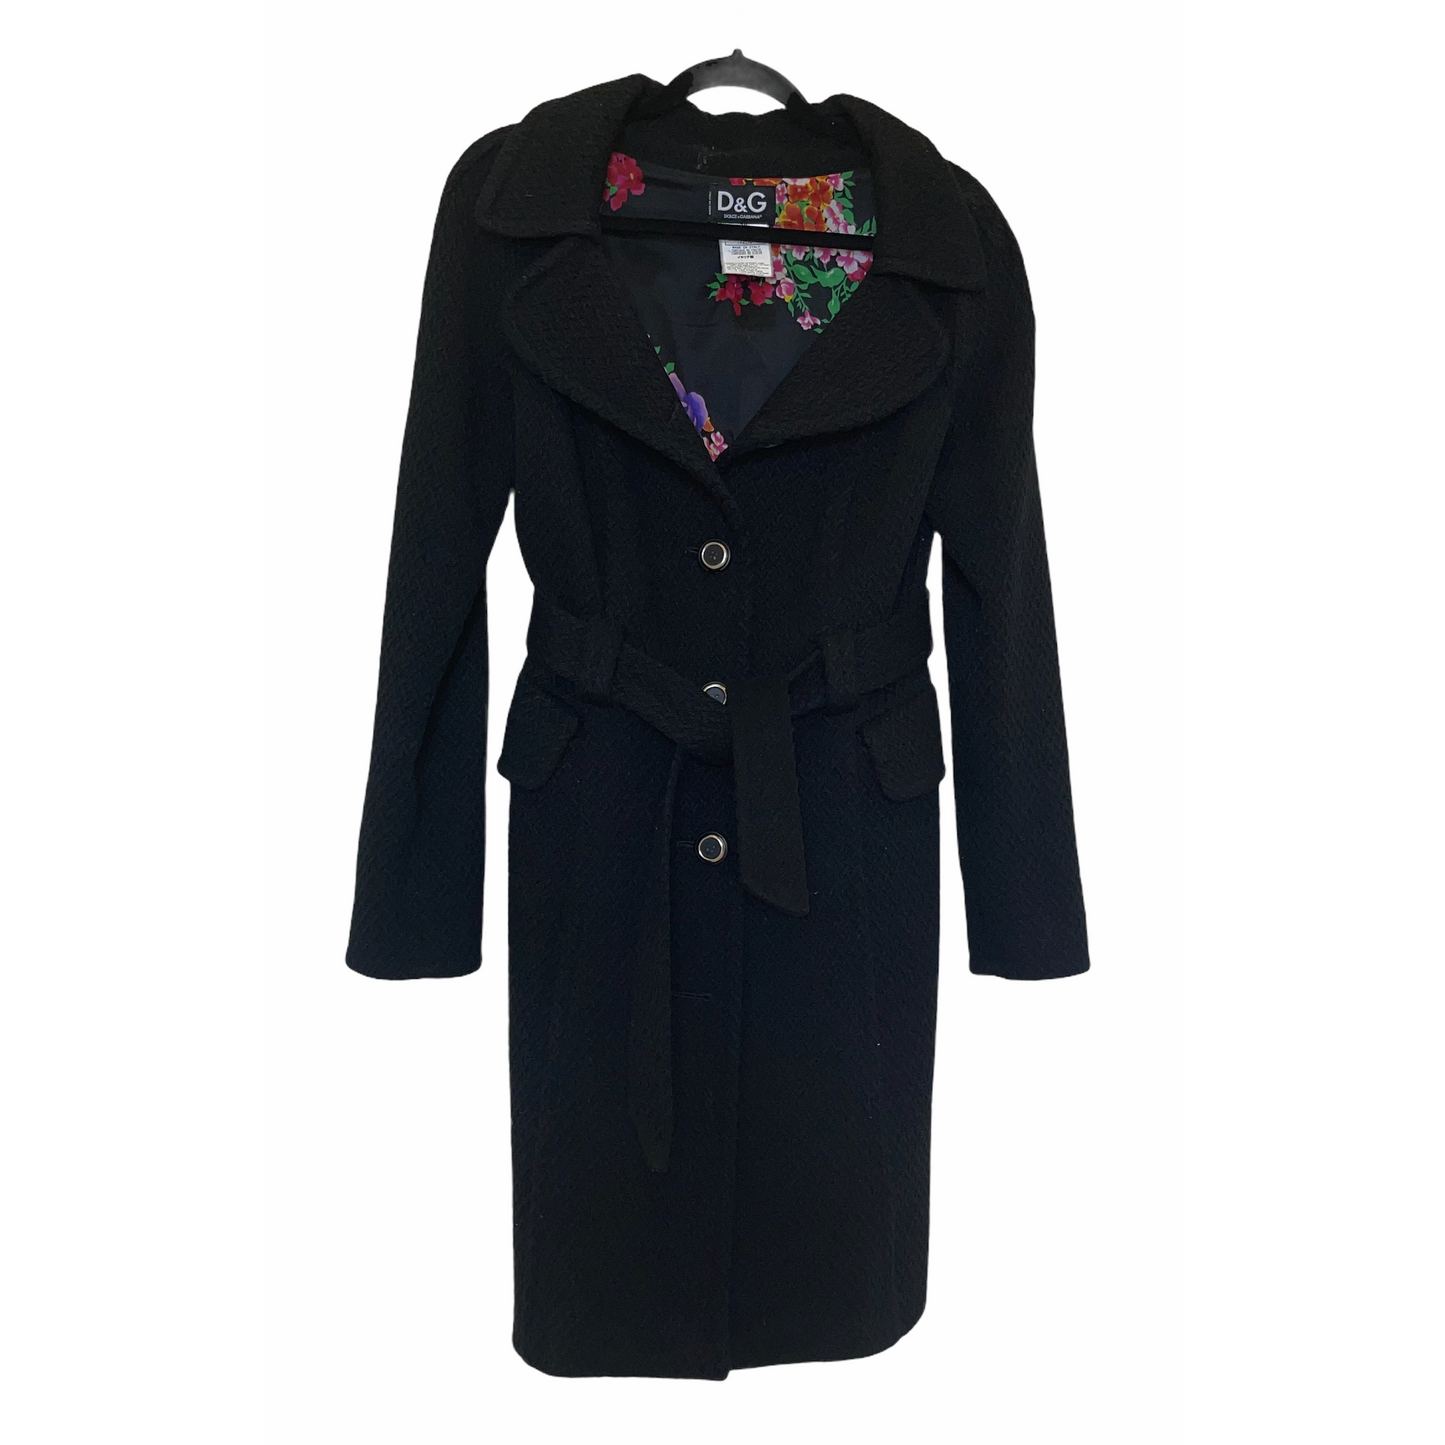 Coat- Button Up Design- Black Colored- By Dolce & Gabbana